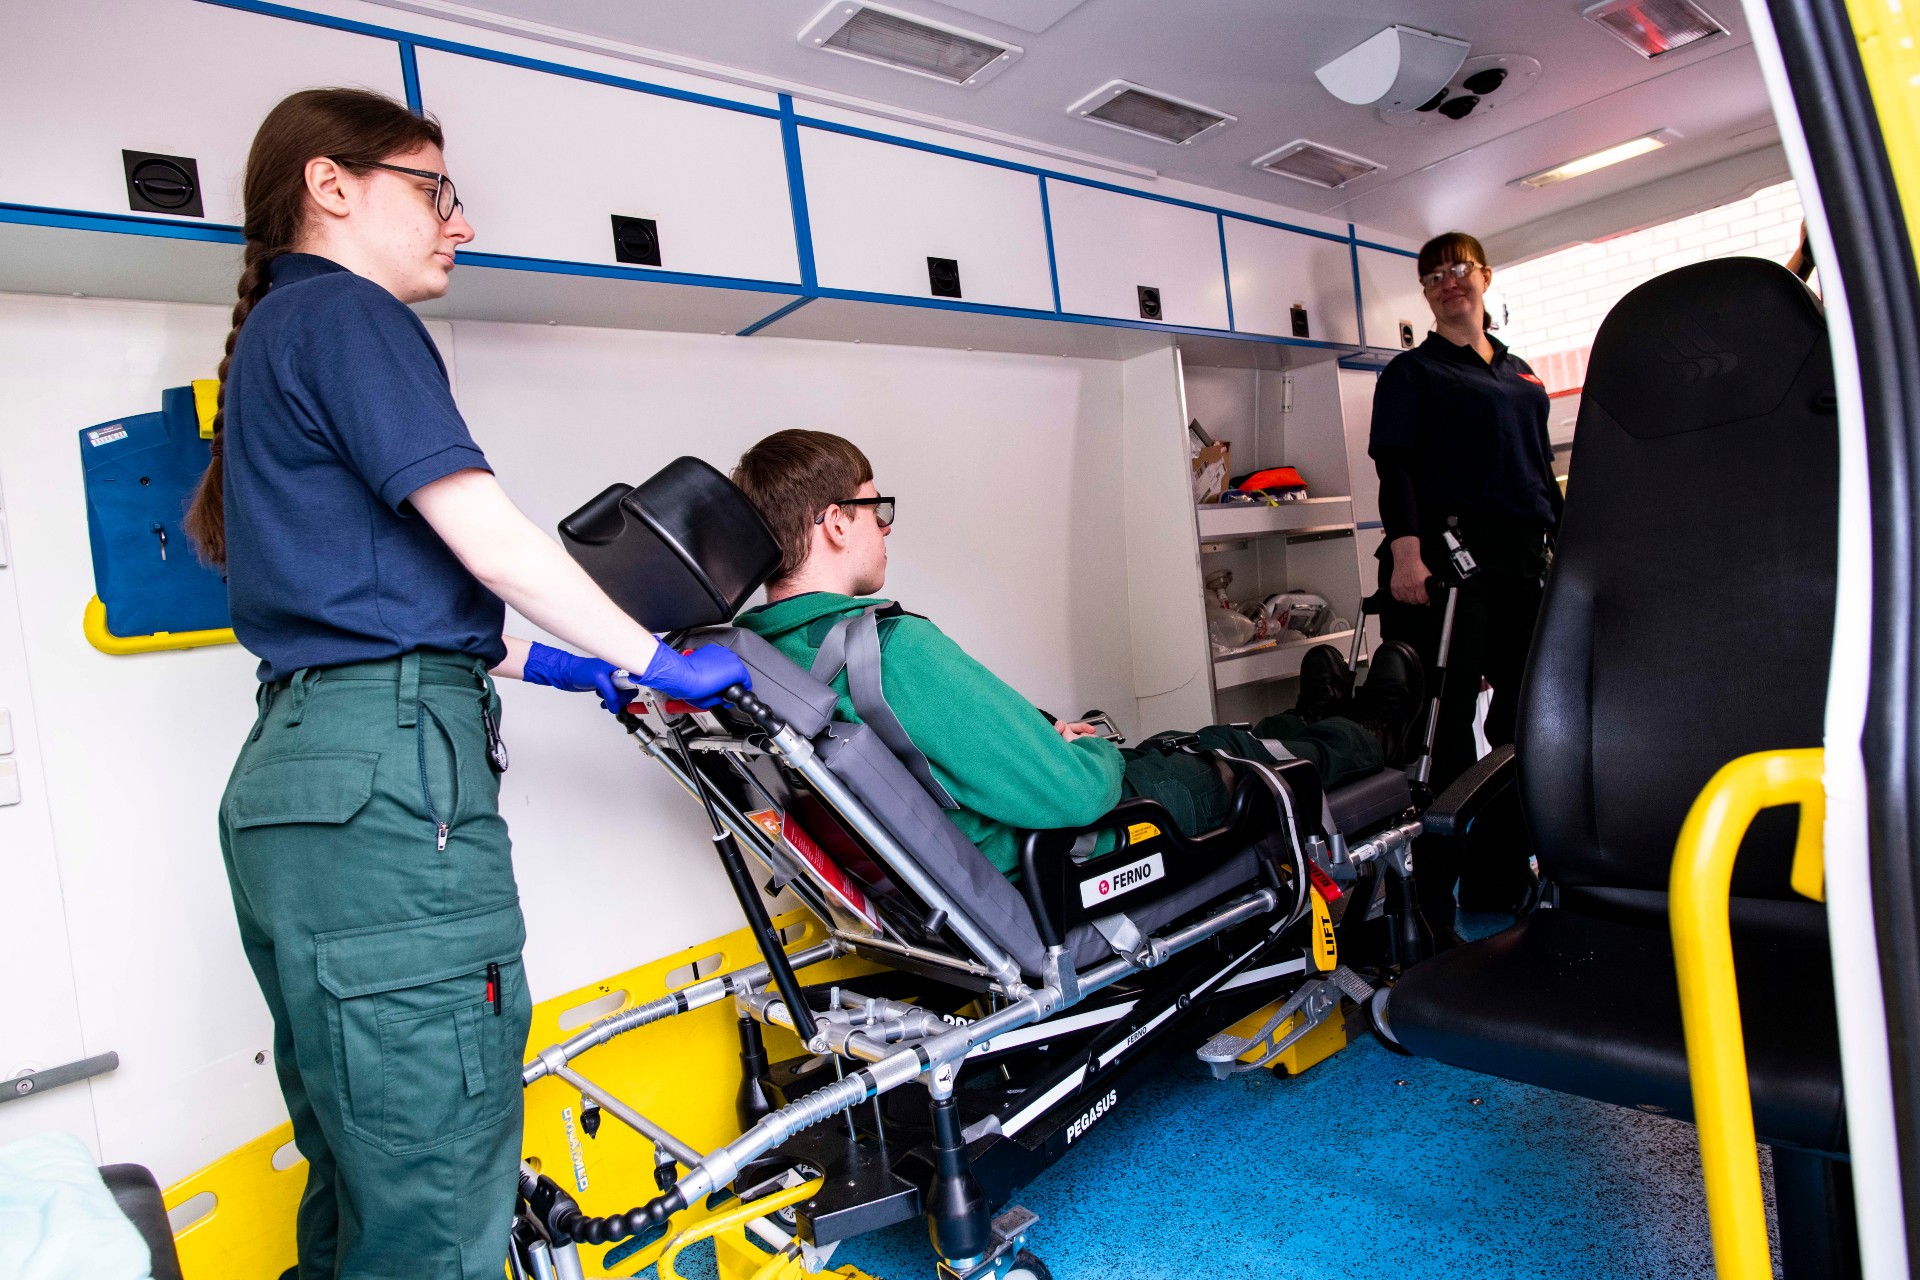 A student helping to remove a patient (played by an actor) from an ambulance on a trolley.